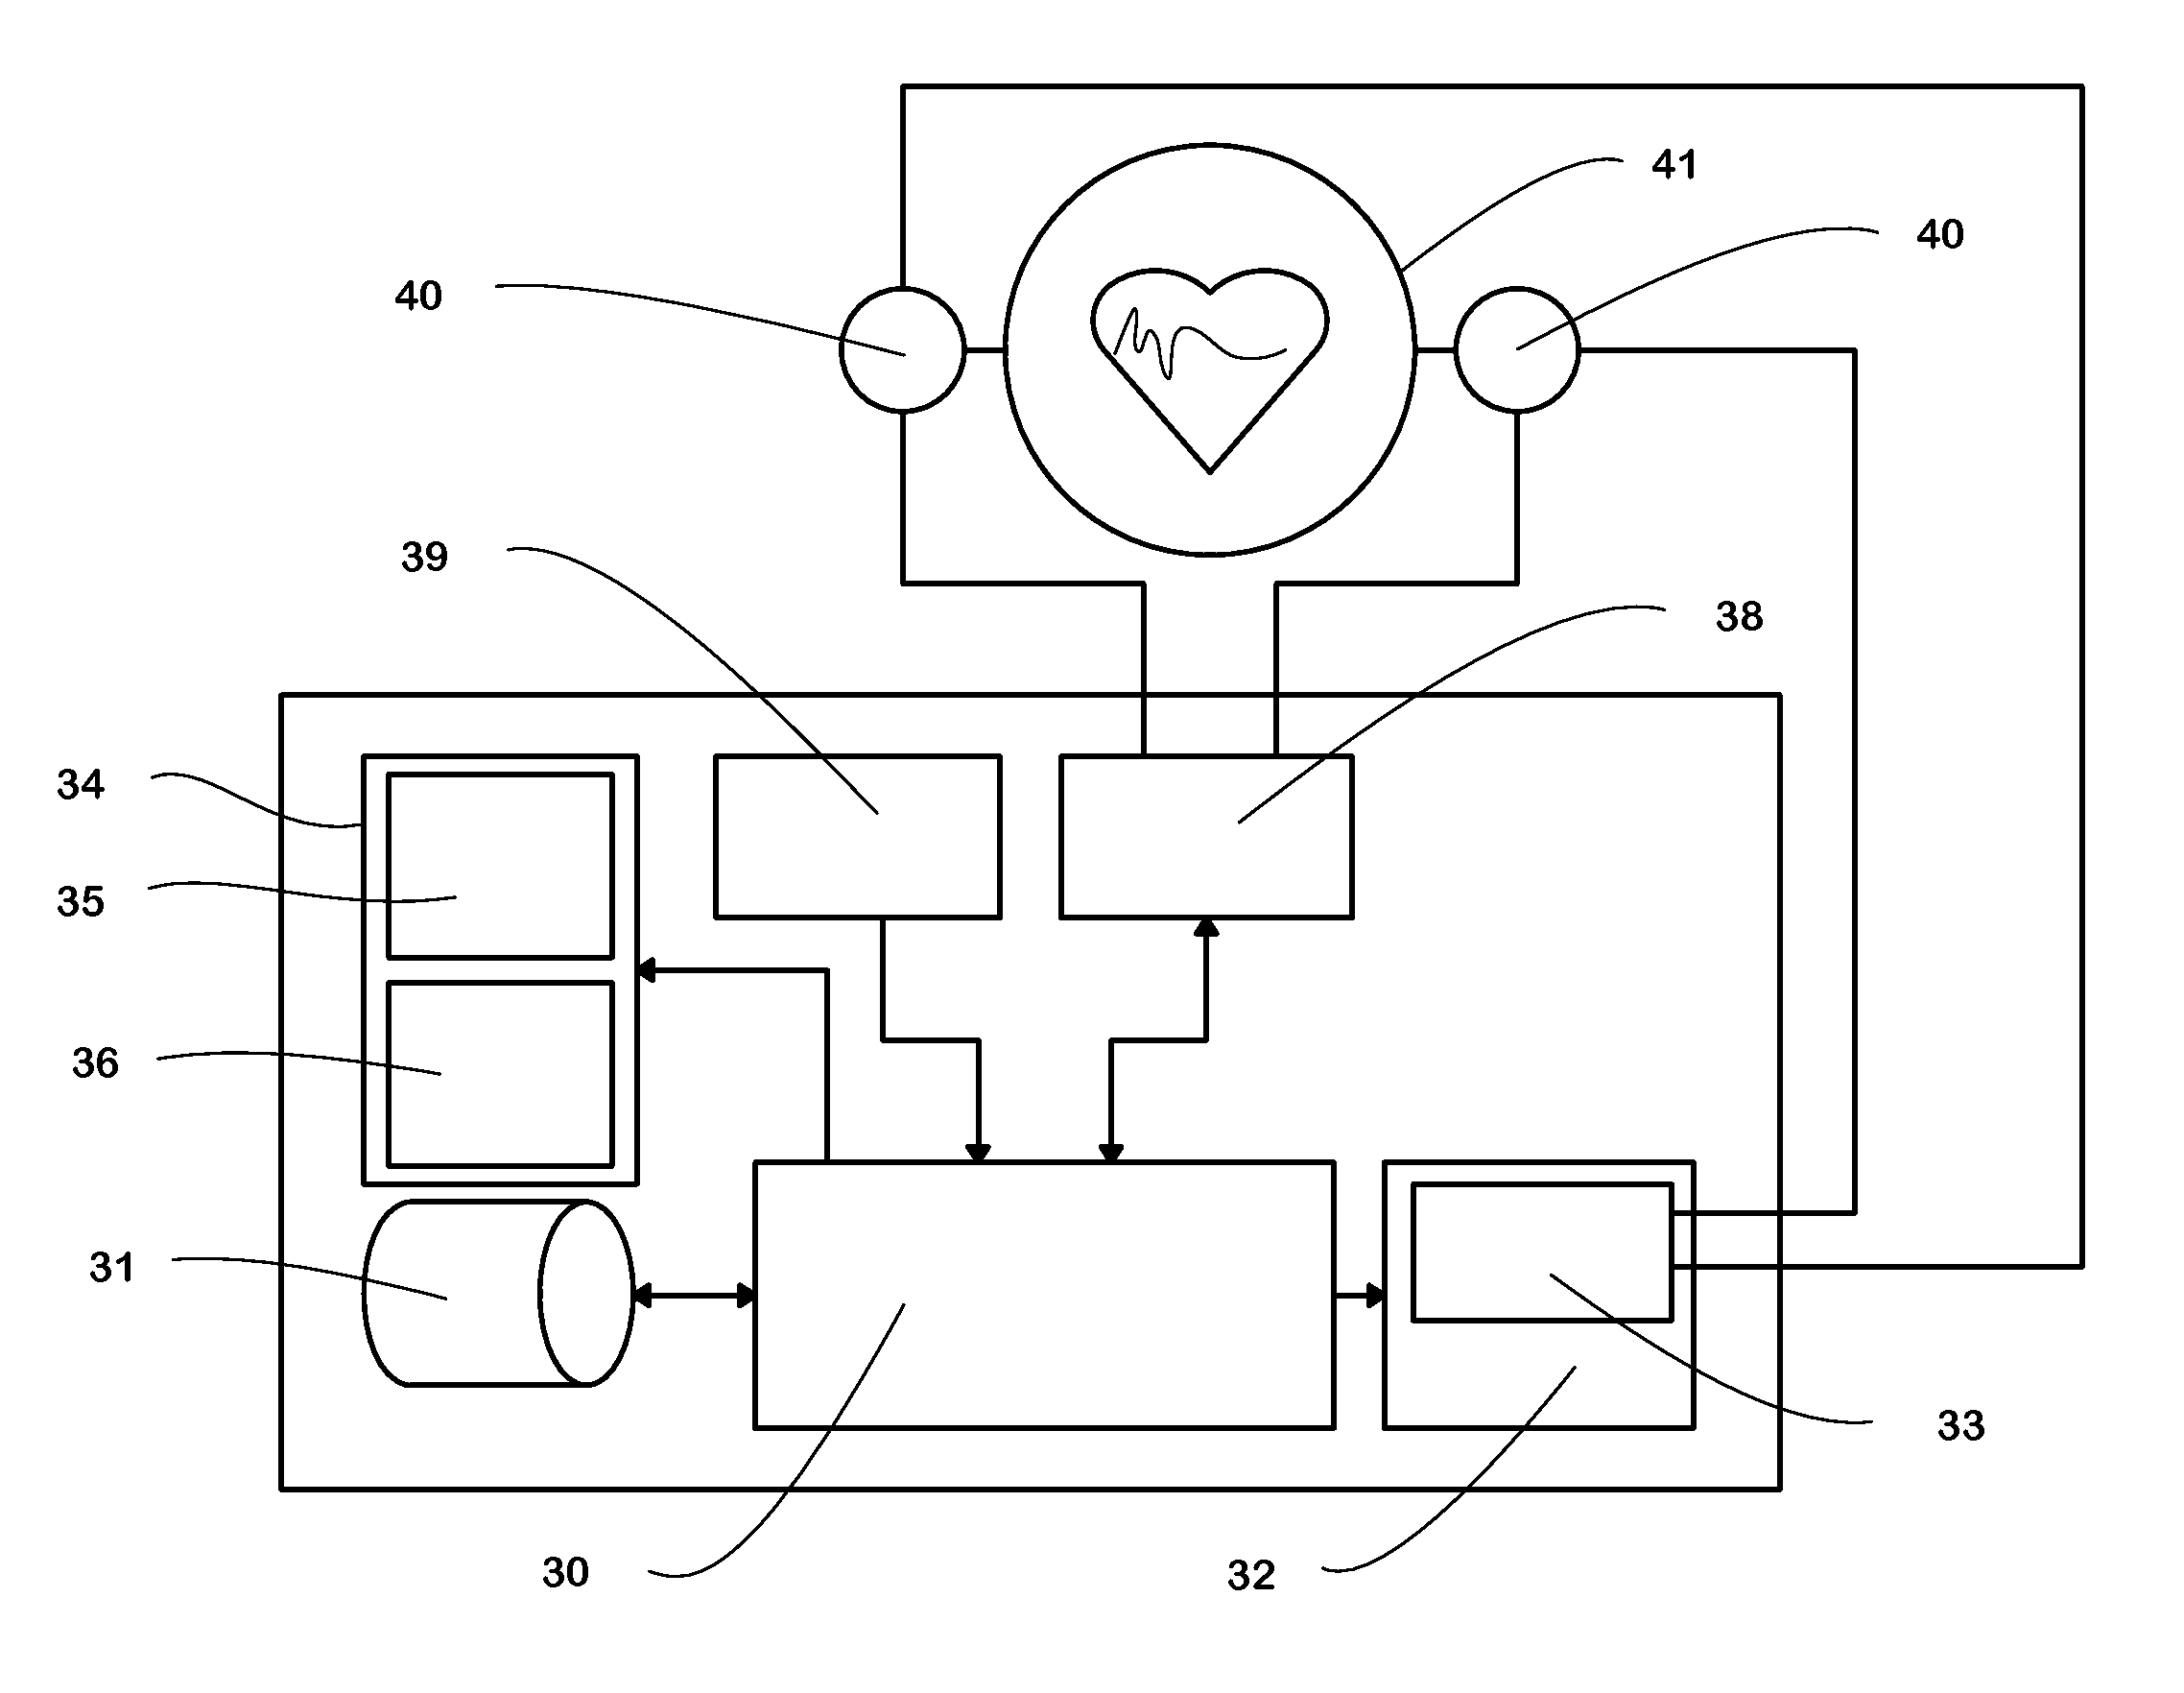 Method, apparatus and computer program for defibrillation delivery decision